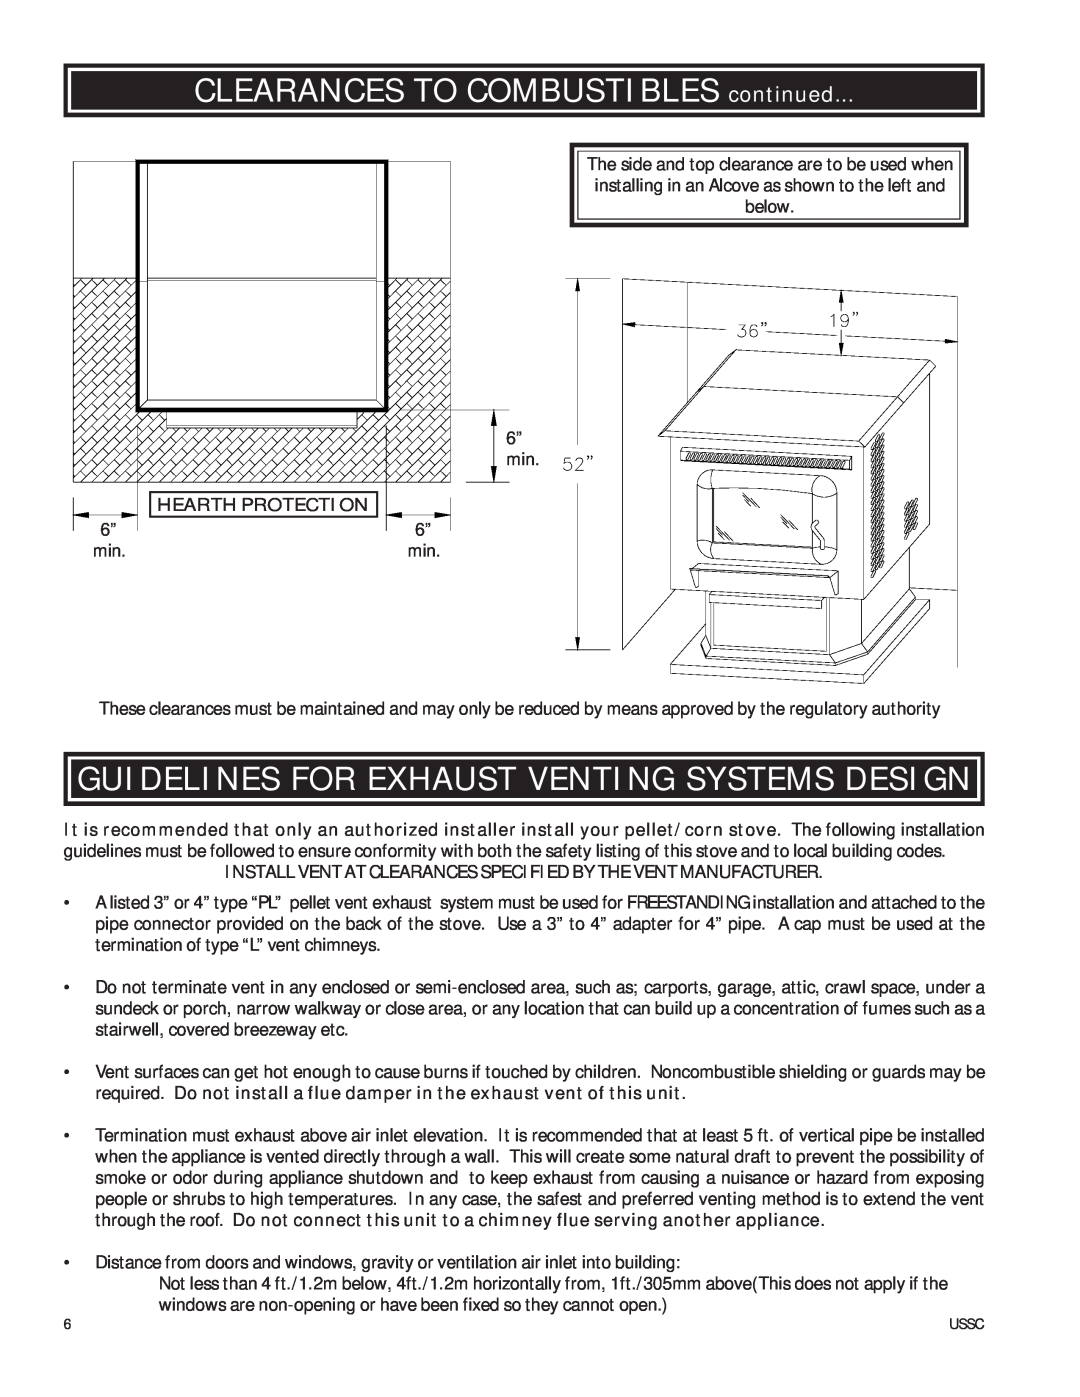 United States Stove 6035 owner manual CLEARANCES TO COMBUSTIBLES continued, Guidelines For Exhaust Venting Systems Design 